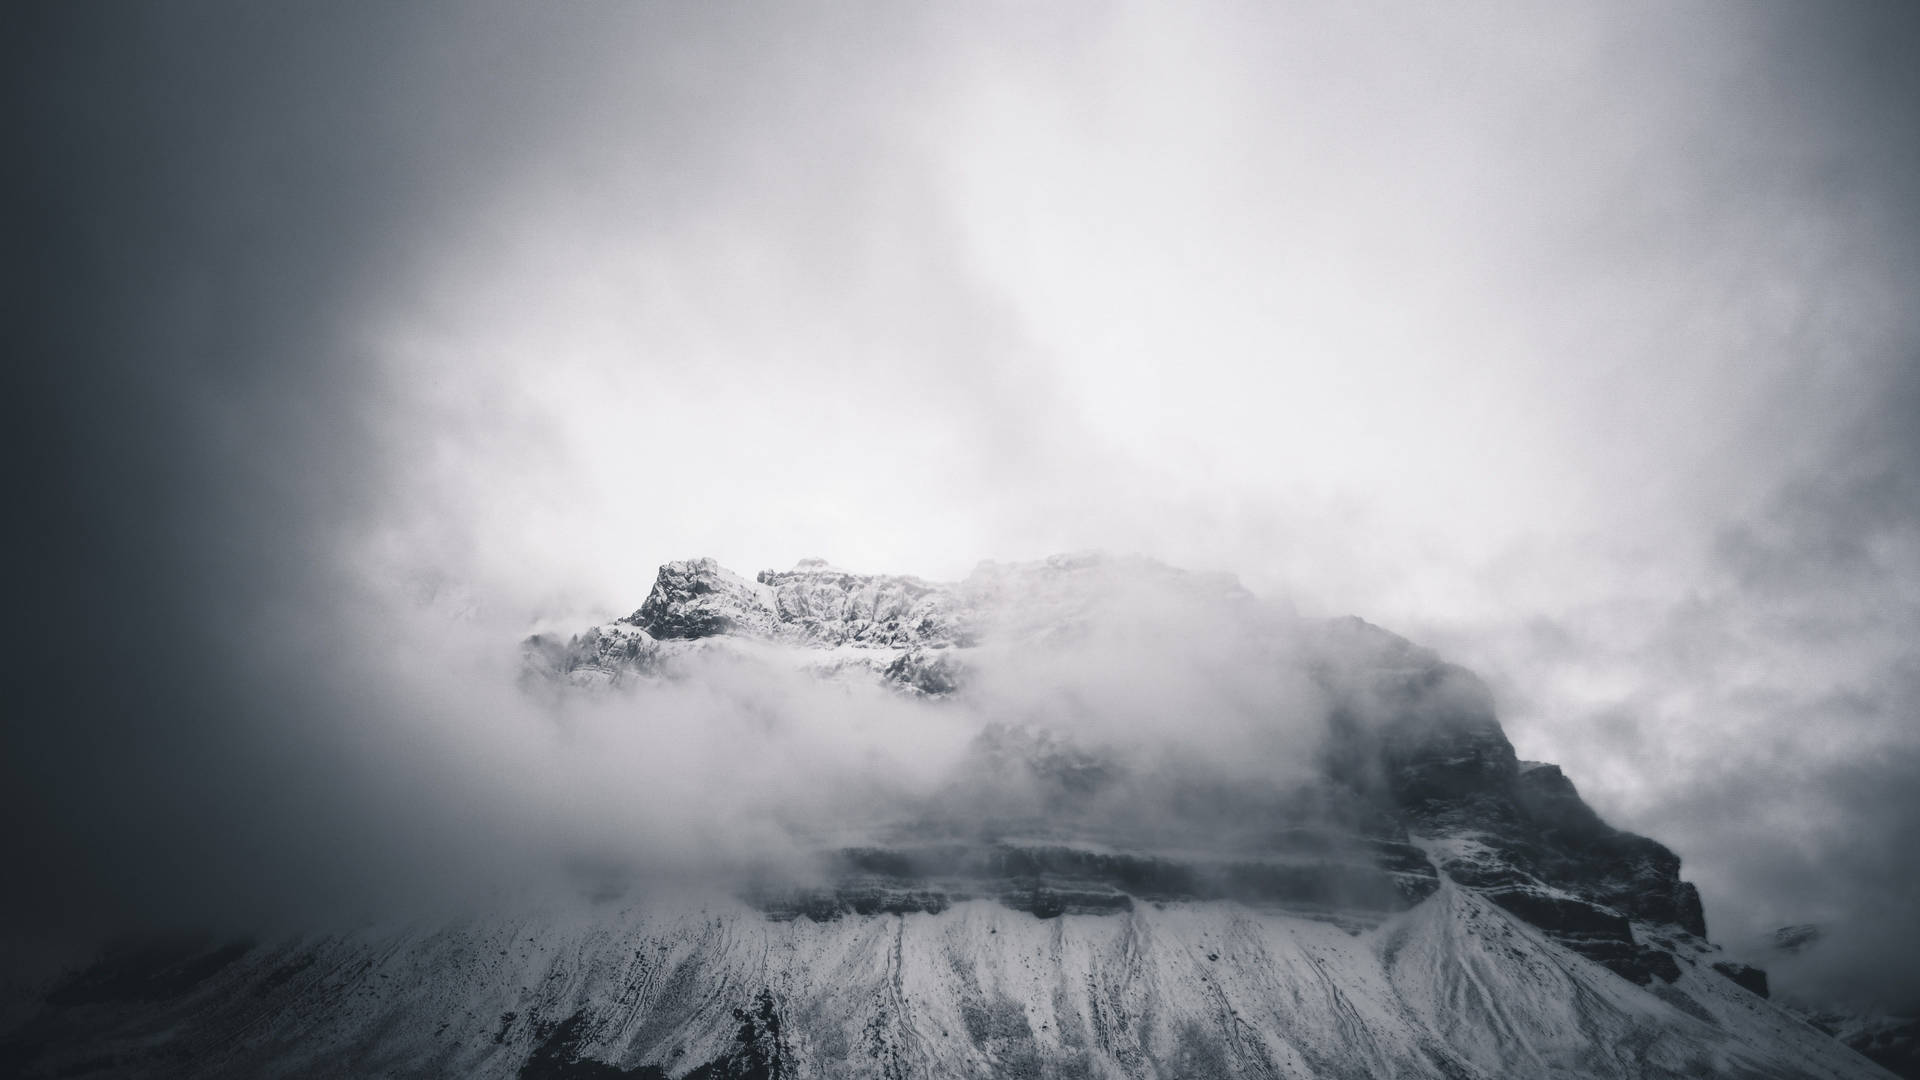 Ominous And Foggy Elevated Landscape Background